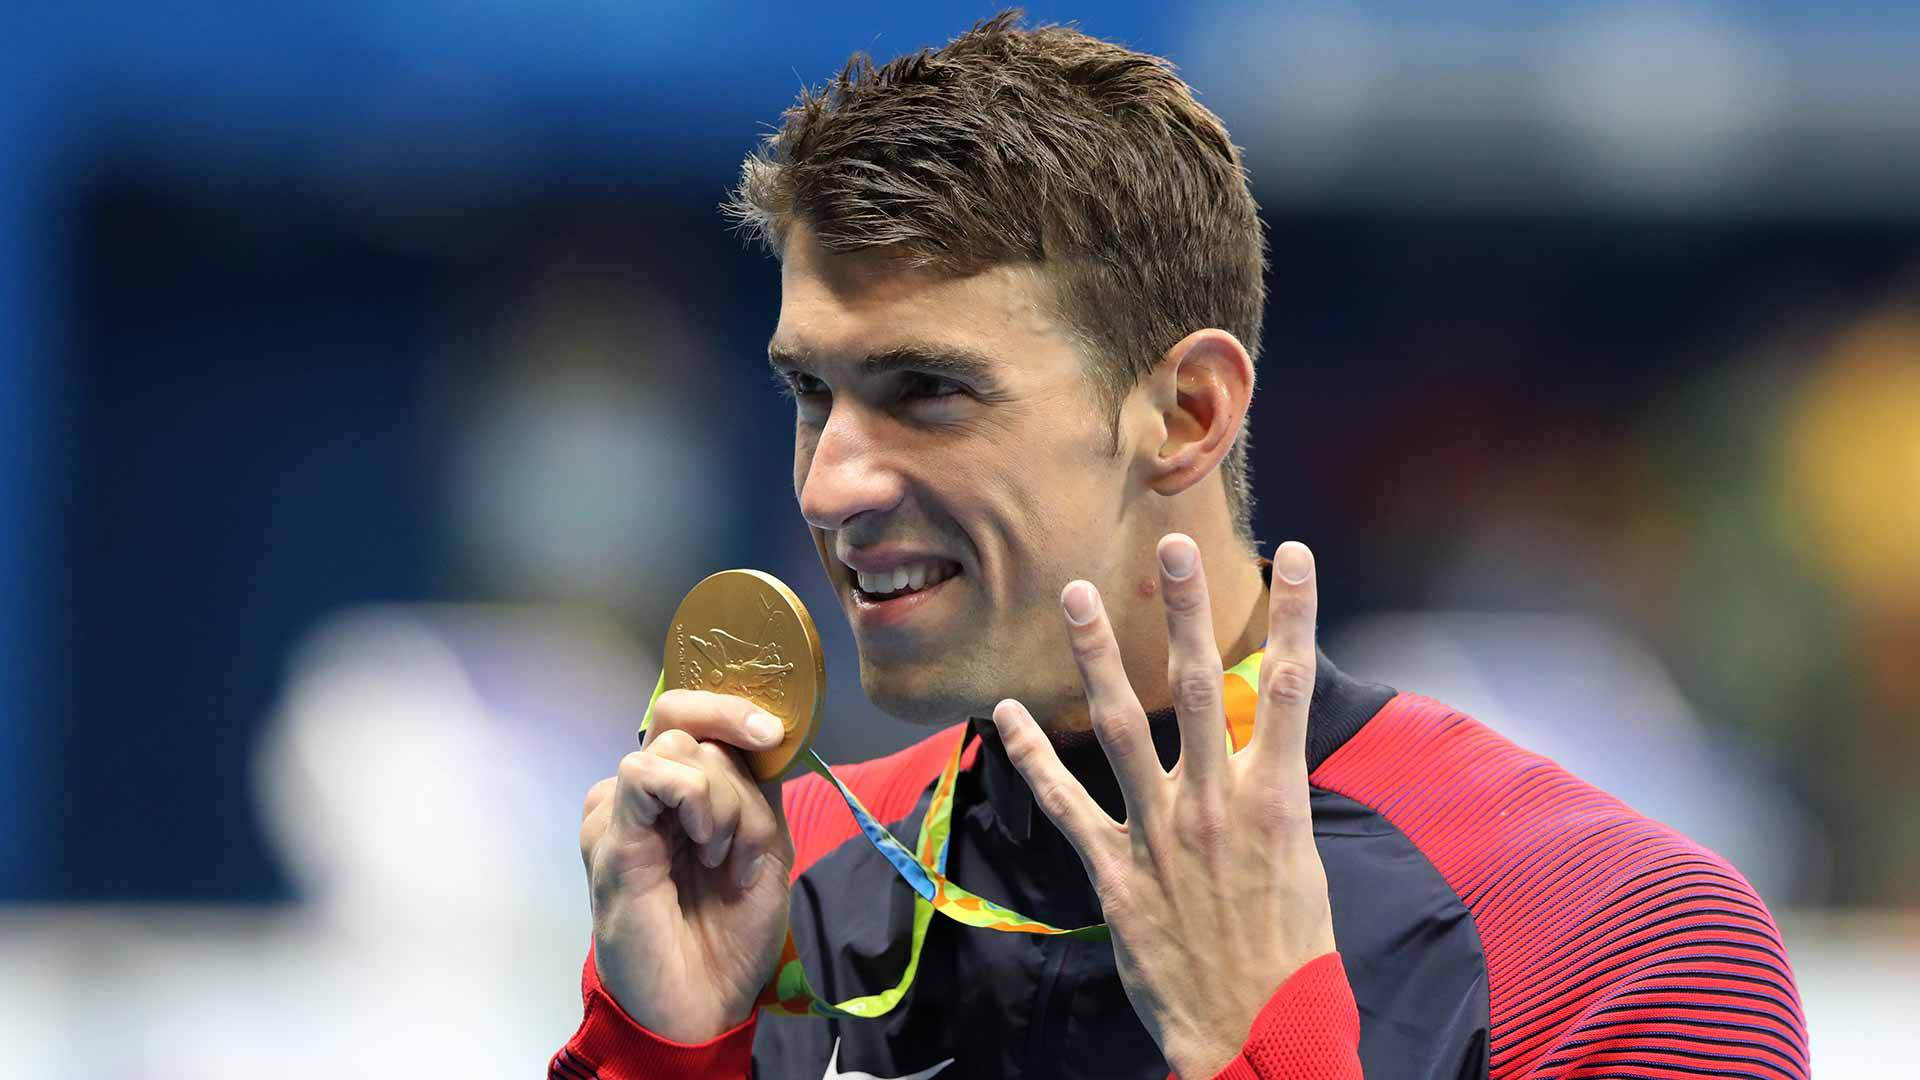 Michael Phelps Displaying Four Victory Signs After Winning Background